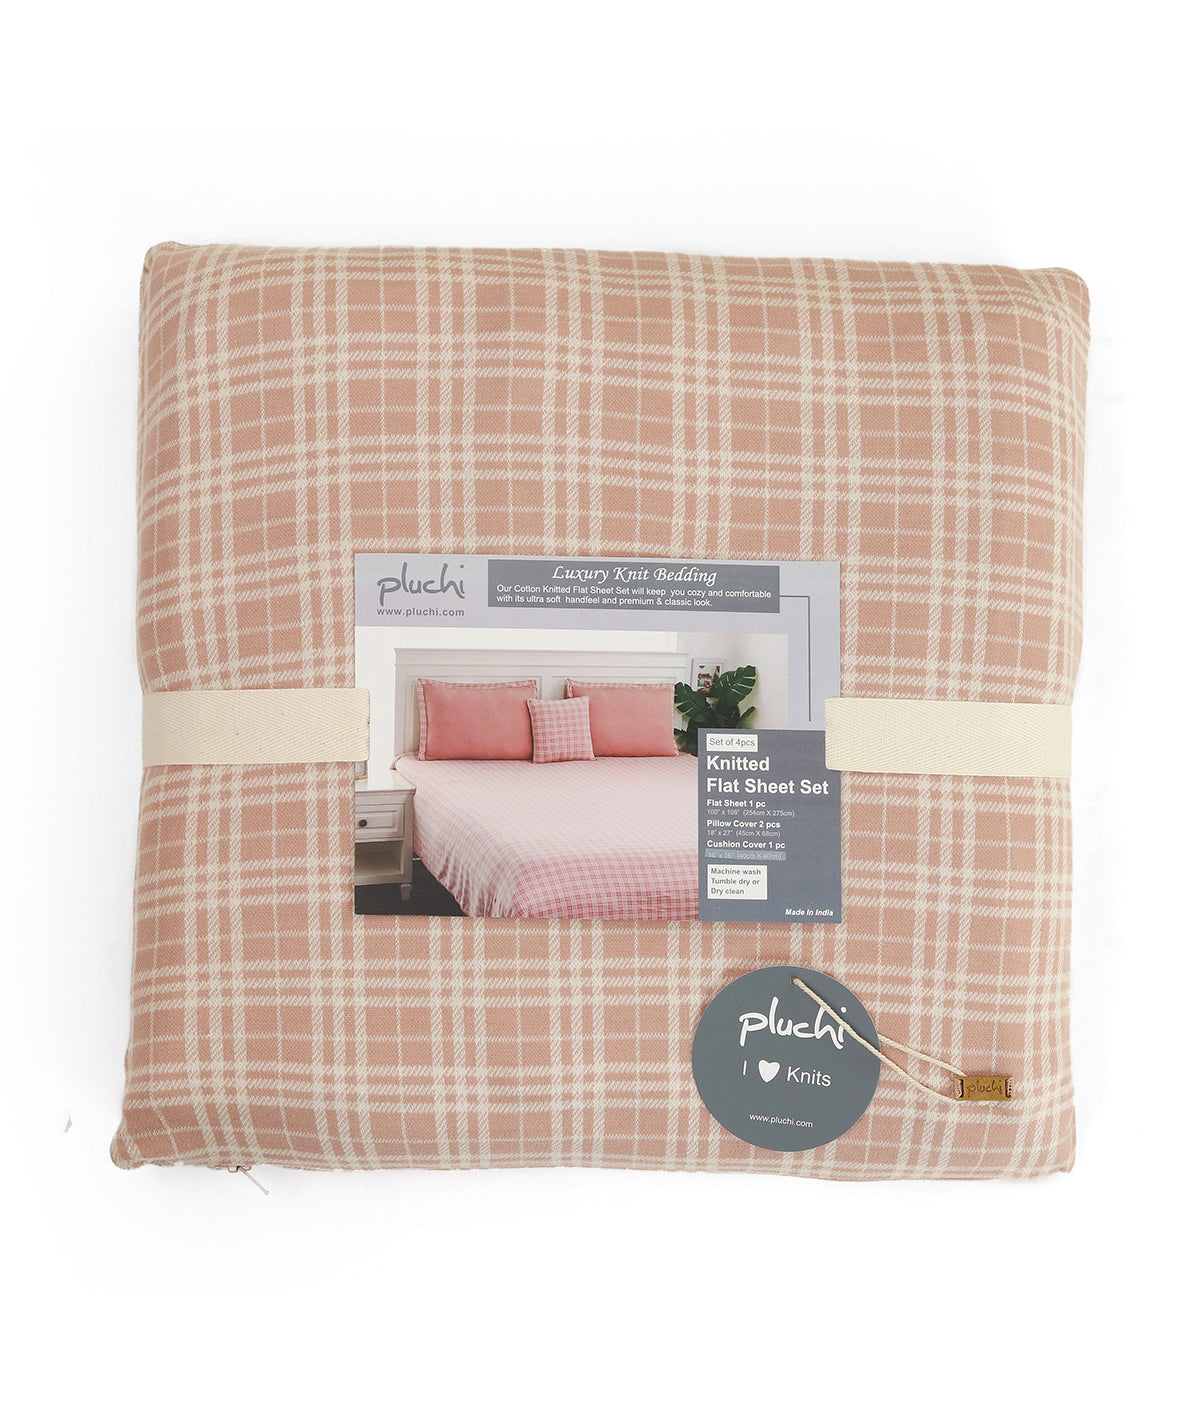 Checkerboard Pale Pink & Natural Color Cotton Knitted King Size Bed Cover/AC Blanket Set (1 bedcover, 2 Pillow Covers, 1 Cushion Cover)